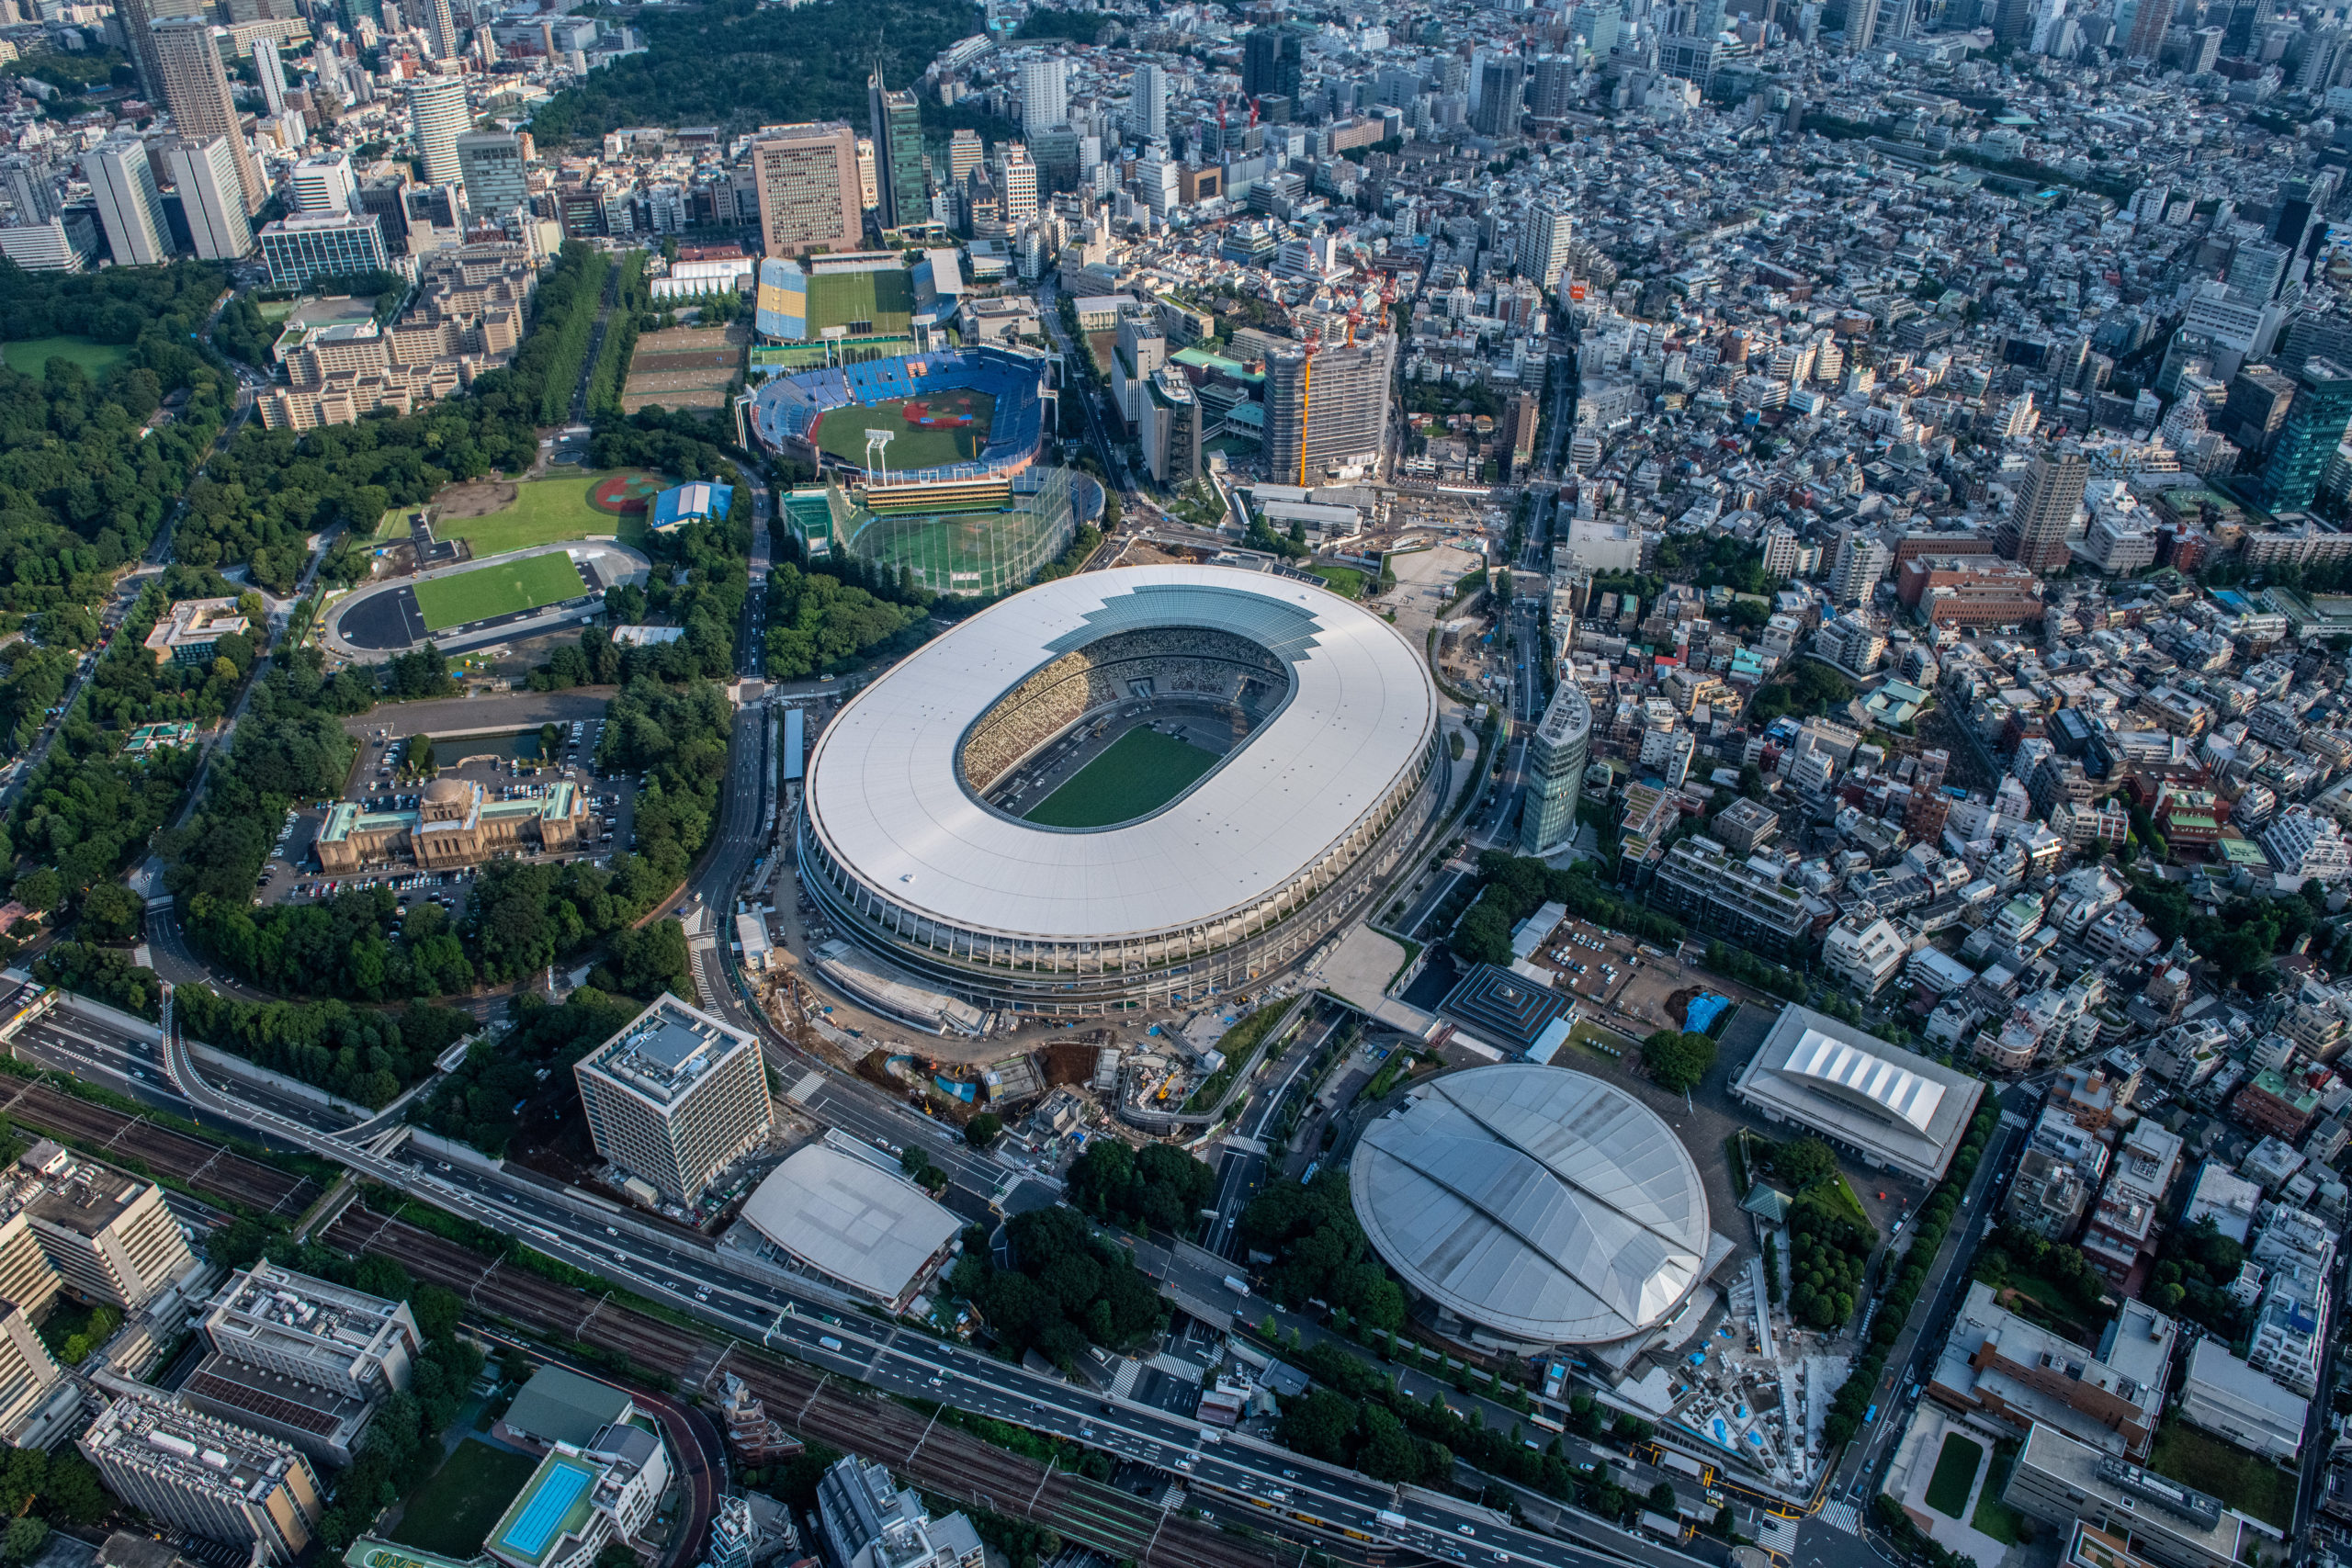  The New National Stadium, the main stadium for the Tokyo 2020 Olympics, is pictured on July 24, 2019 in Tokyo, Japan. (Photo by Carl Court/Getty Images)